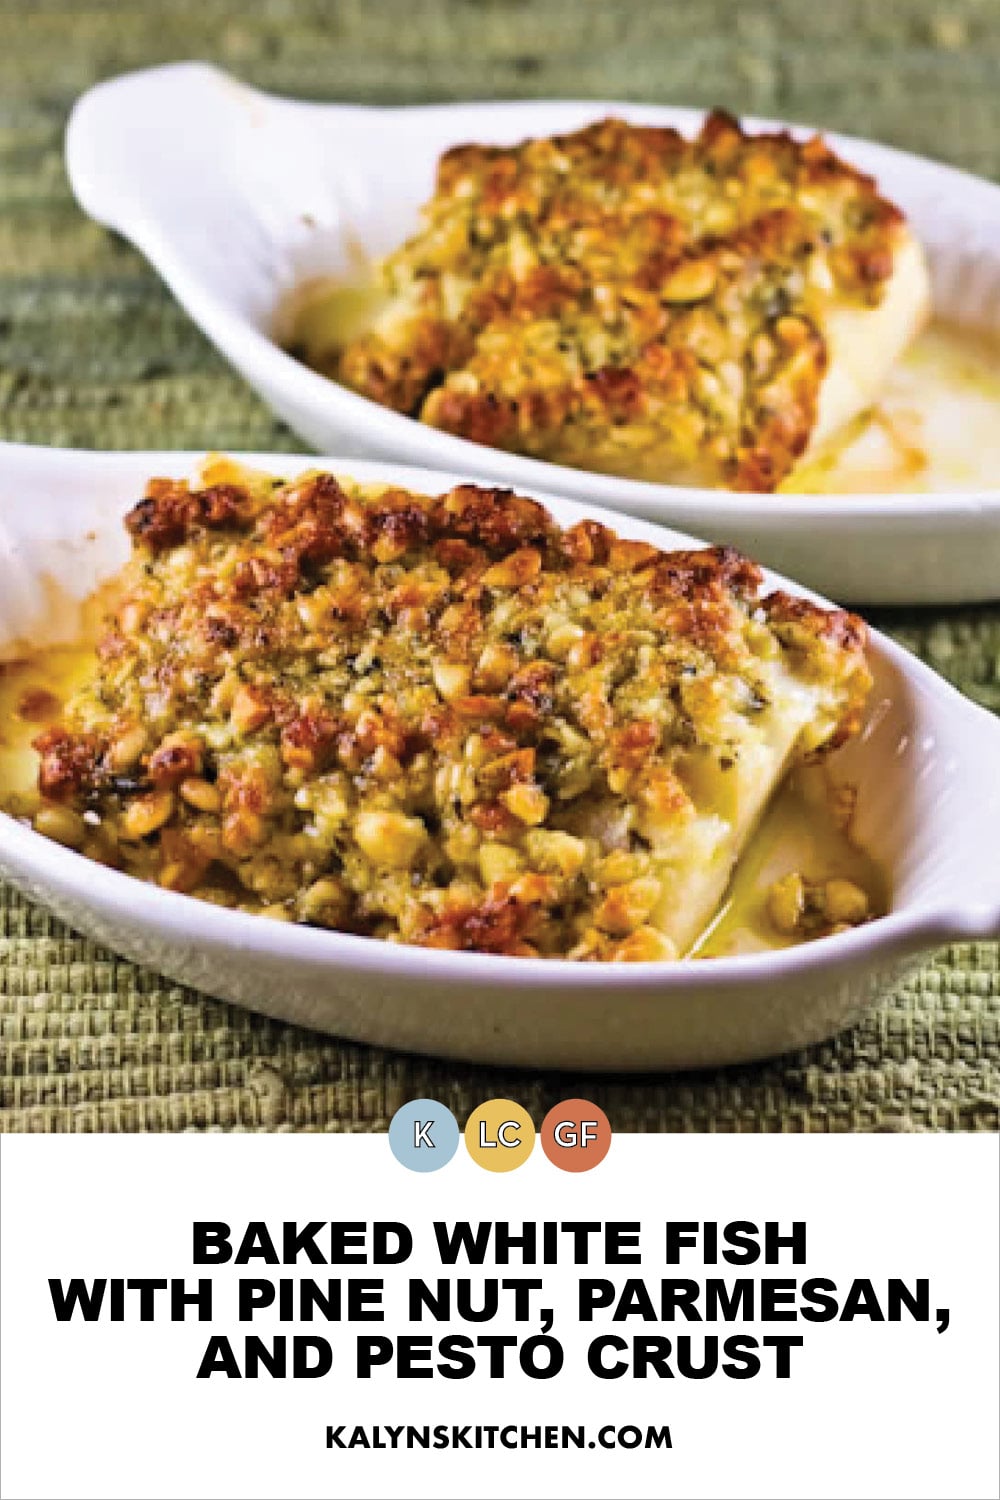 Pinterest image of Baked White Fish with Pine Nut, Parmesan, and Pesto Crust